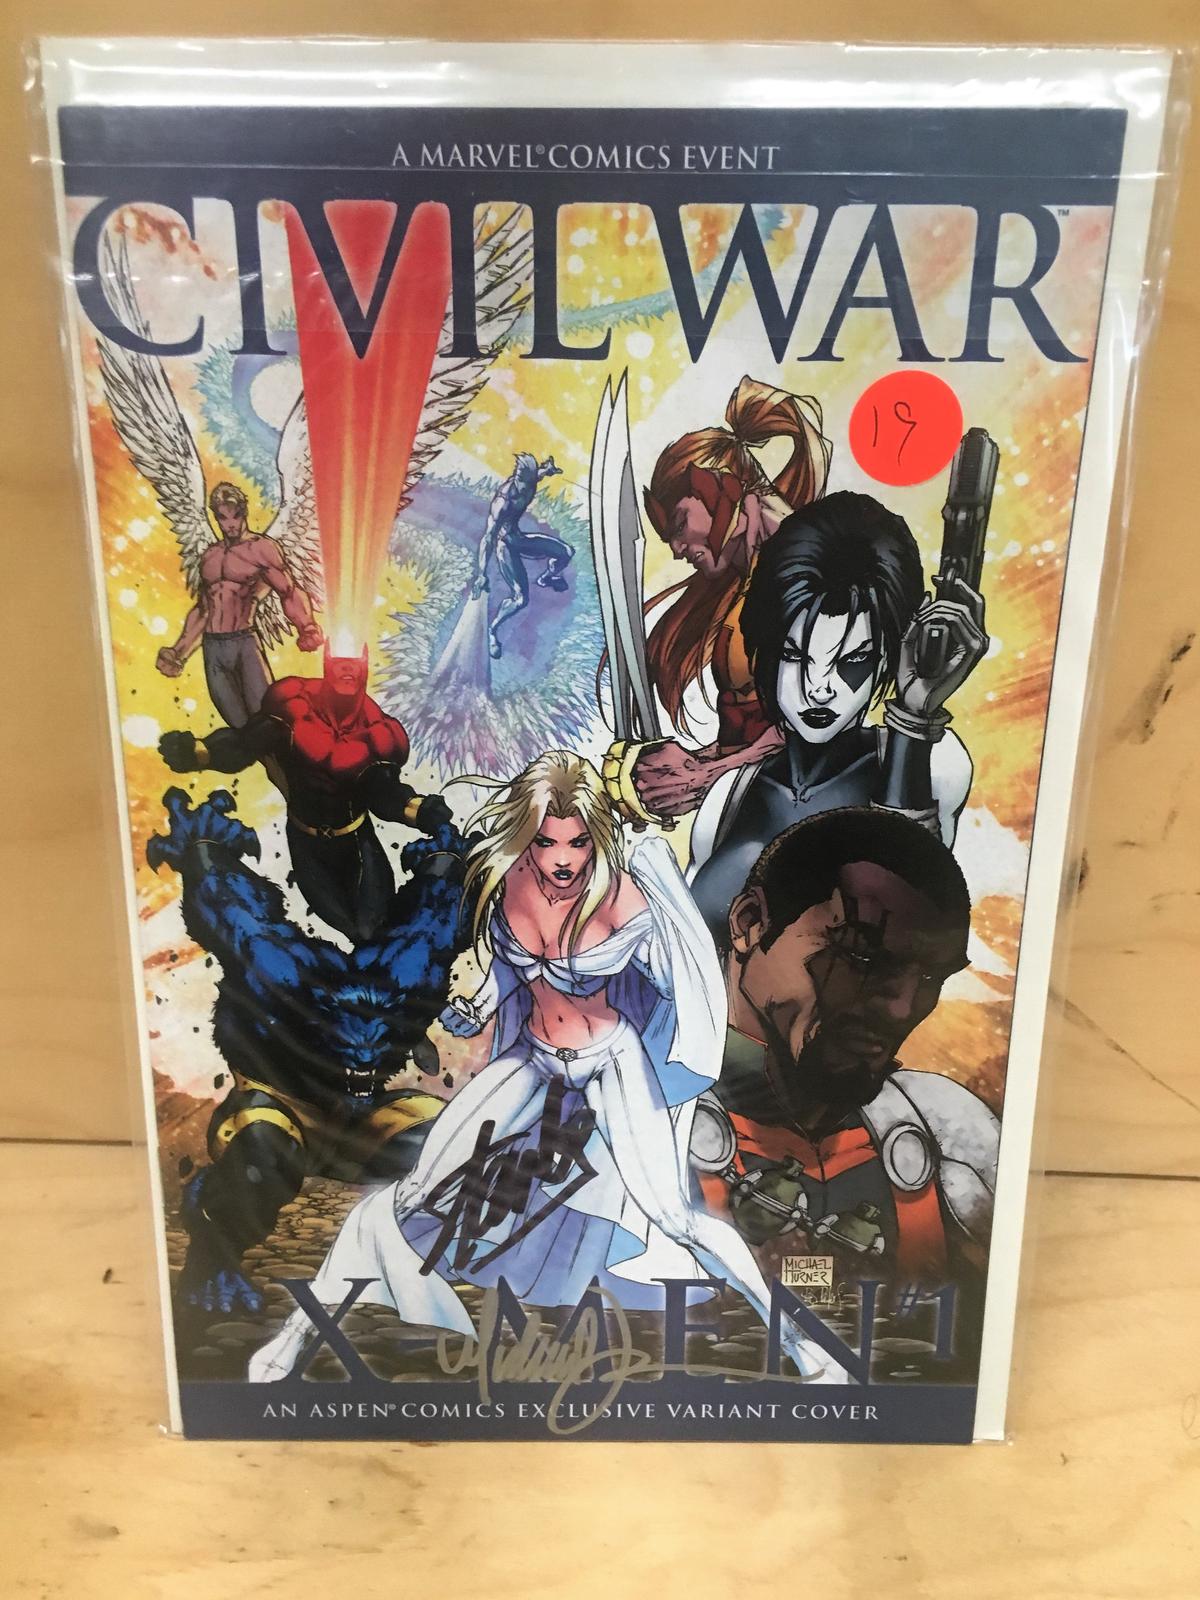 Civil War X-Men Aspen Exclusive Variant Cover signed by STAN LEE & Michael Turner!  Wowsa!